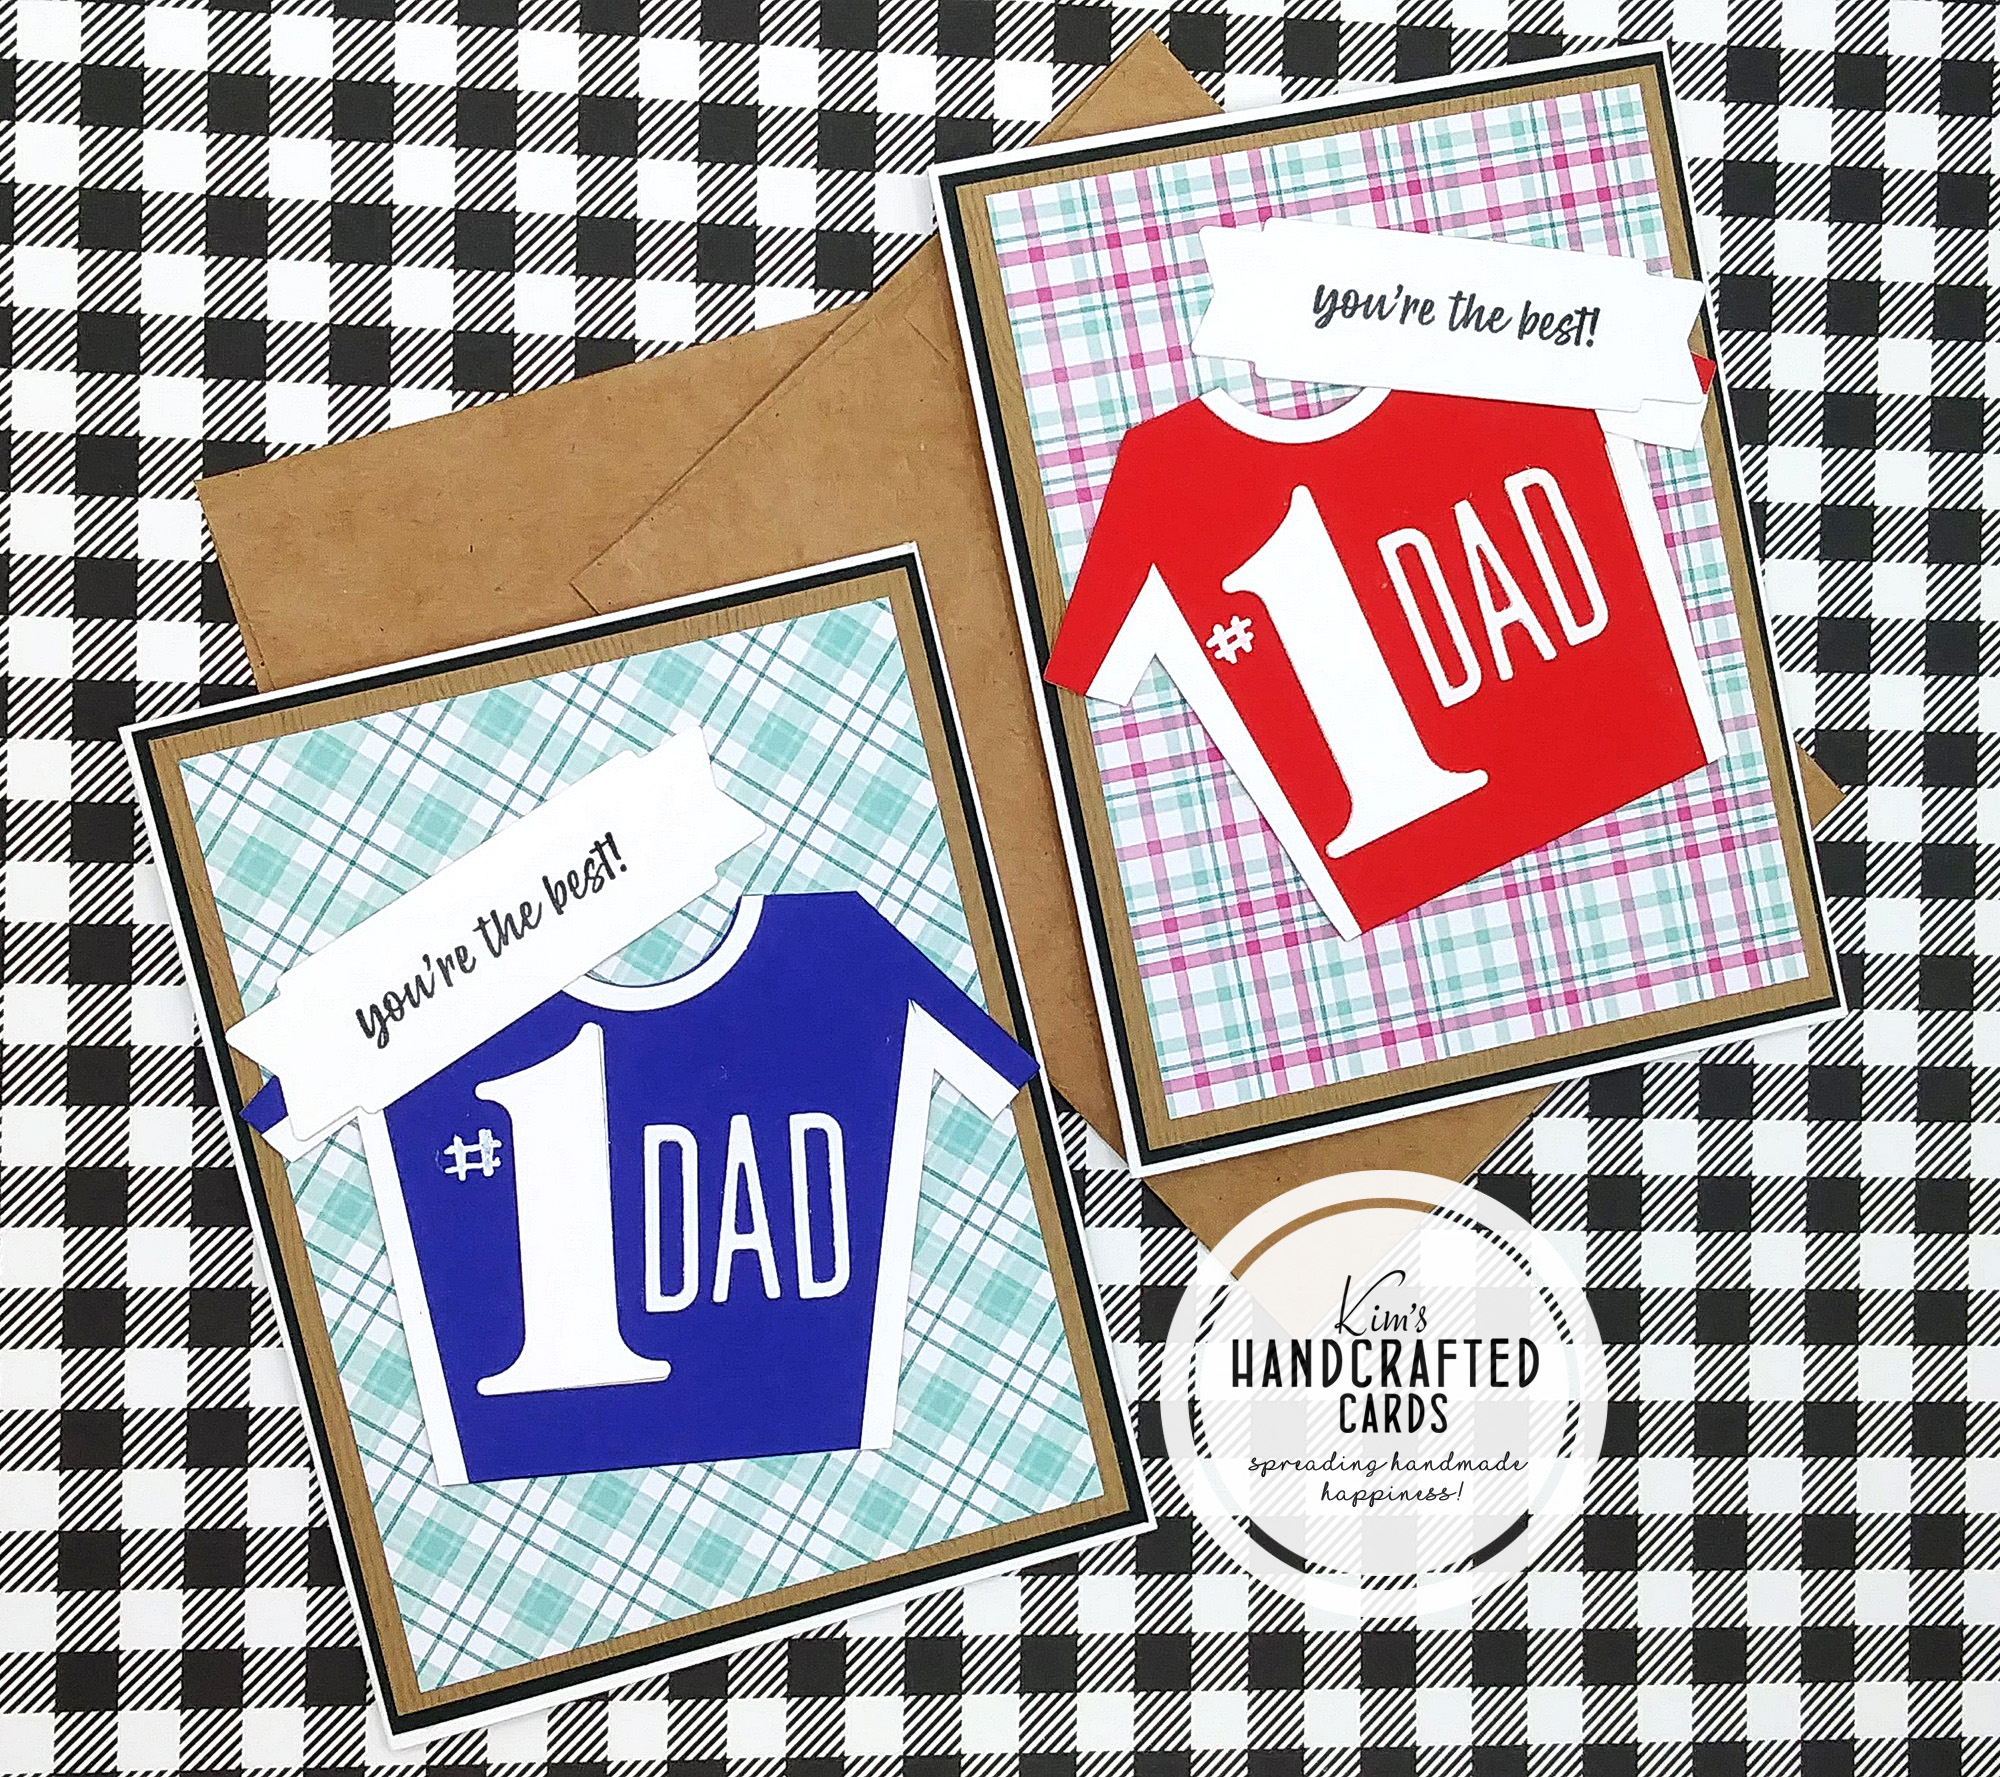 A CreativA Creative Accident turned into a Wonderful Father's Day Card